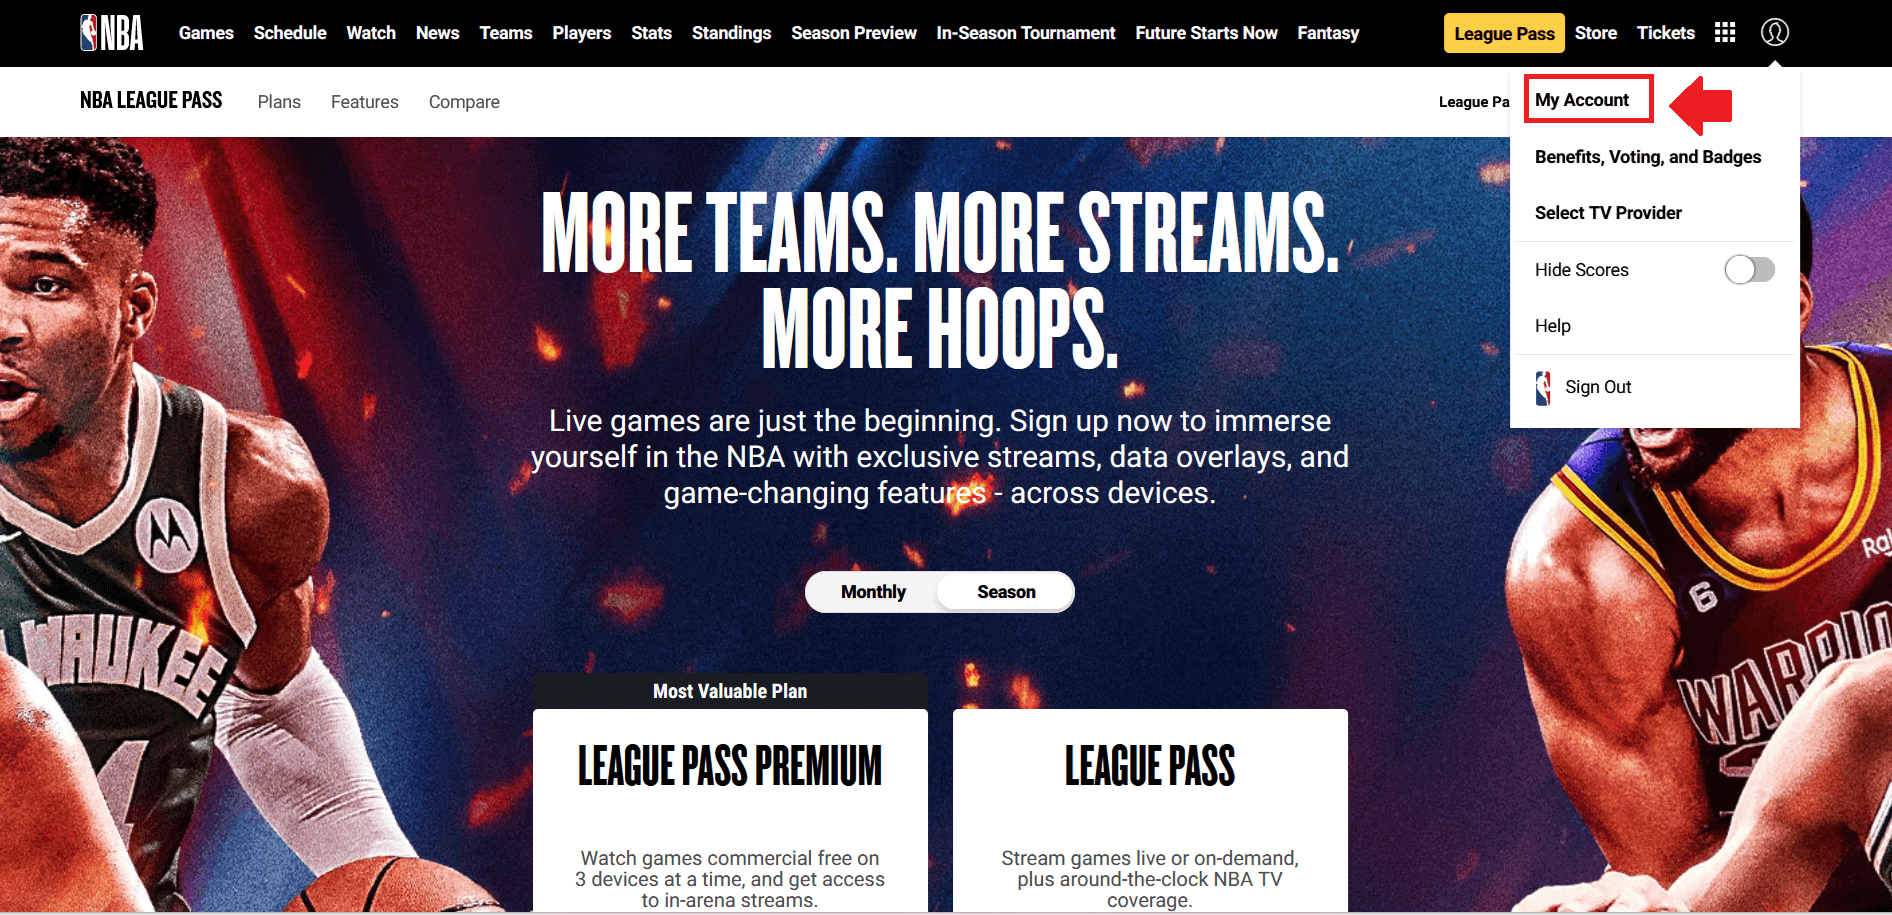 How to Watch NBA Games: Channels & streaming options